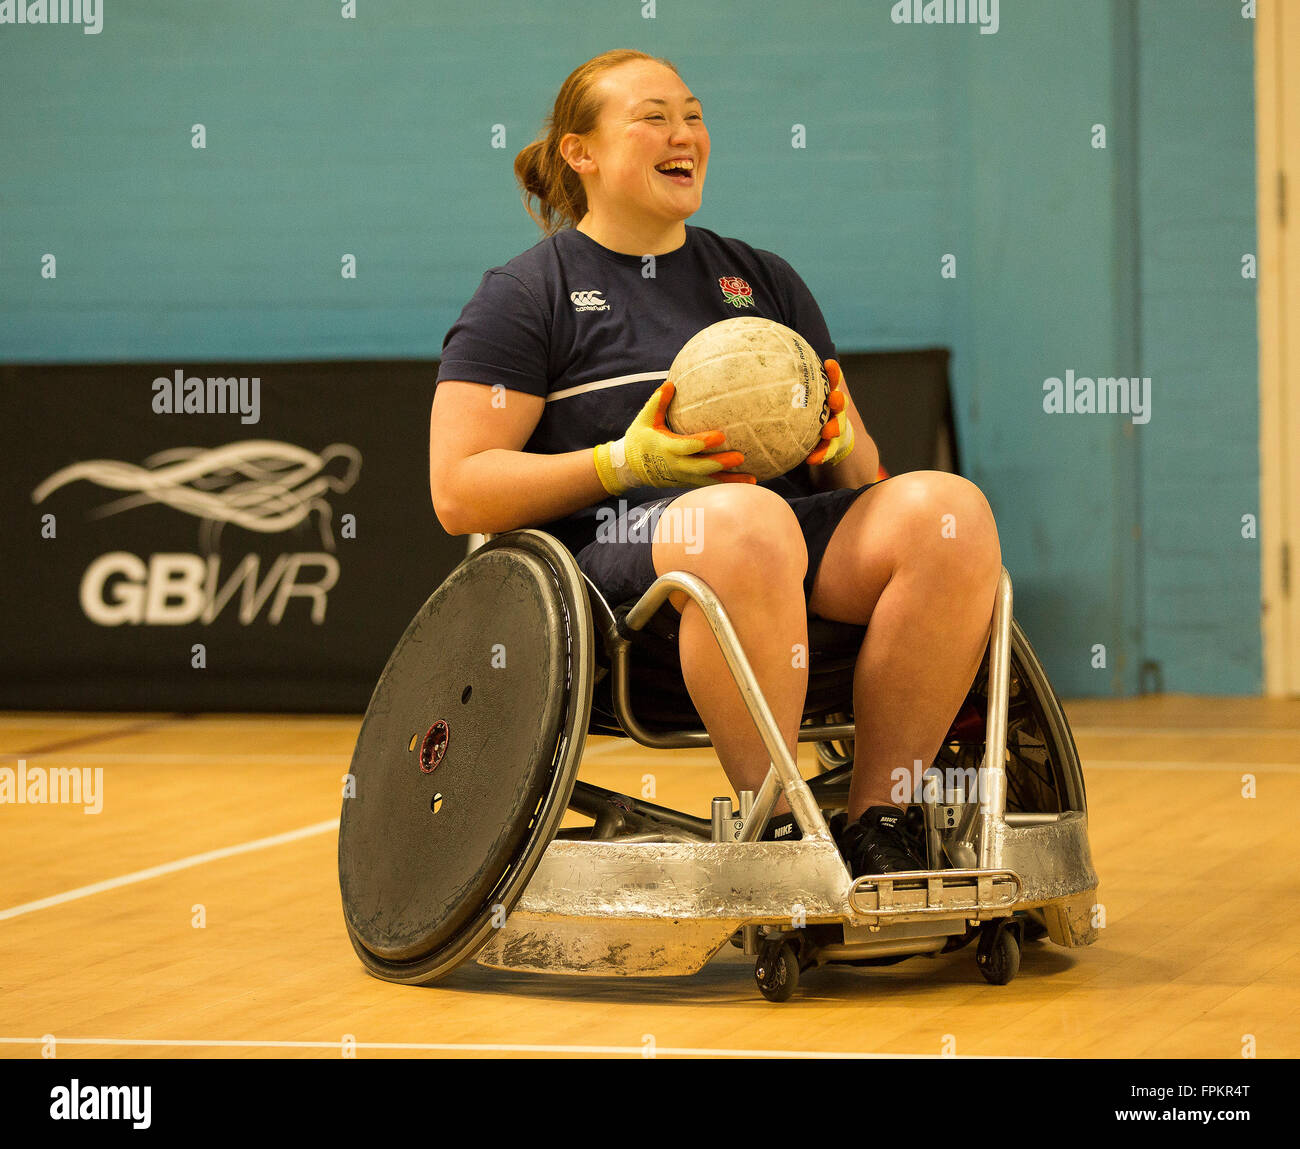 Loughborough College, Loughborough, UK. 19th Mar, 2016. Great Britain  Wheelchair Rugby (GBWR) This Girl Can Campaign Launch. Laura Keates, a  member of the England Women's Rugby Union team who were crowned world